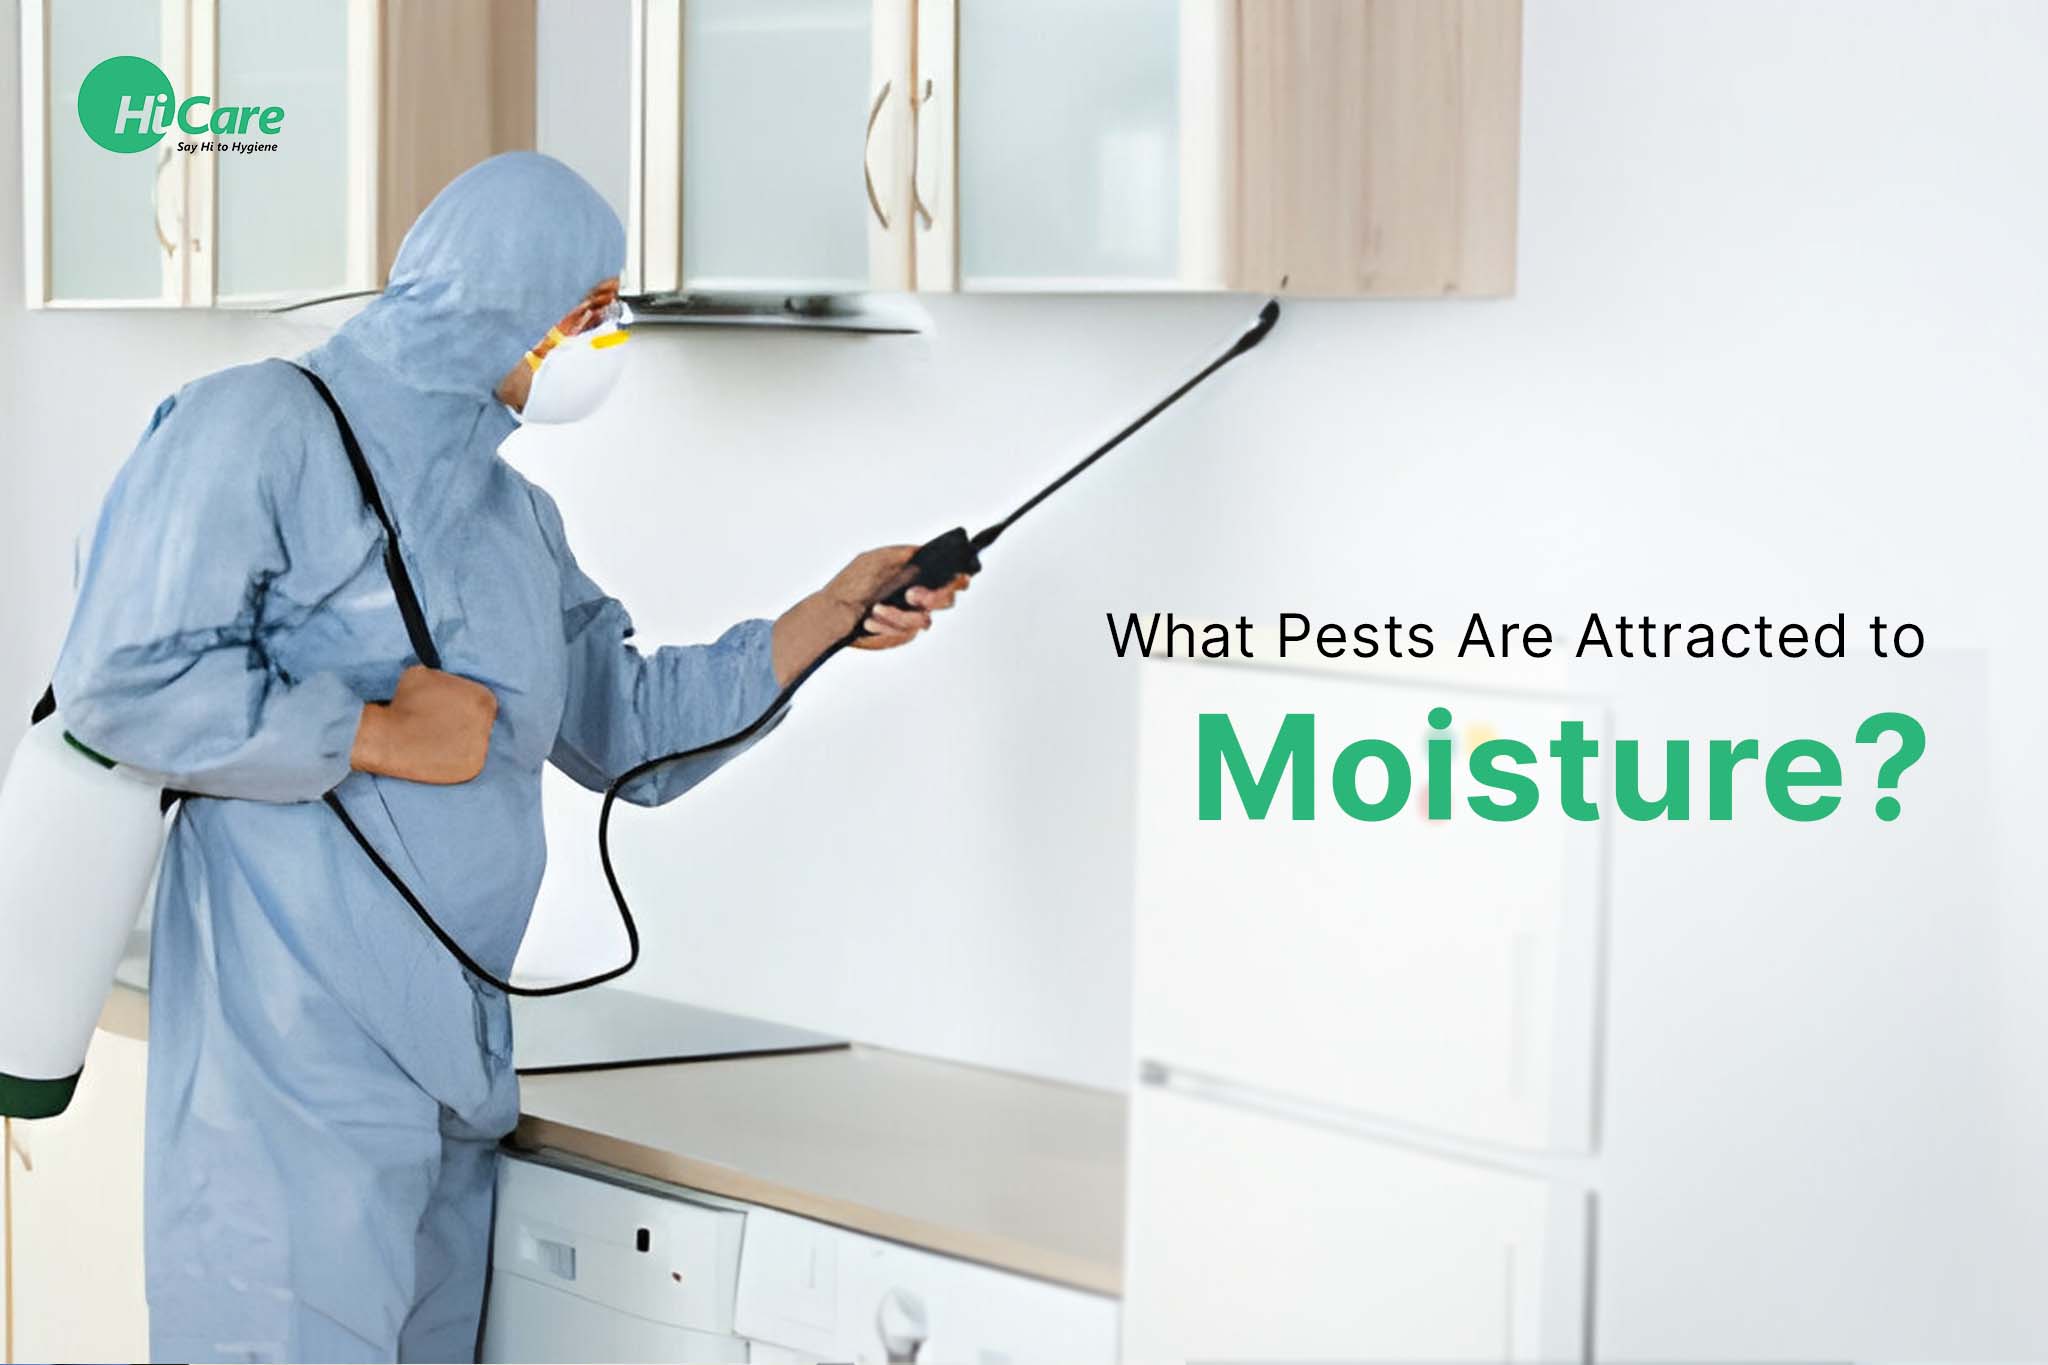 What Pests are Attracted to Moisture?